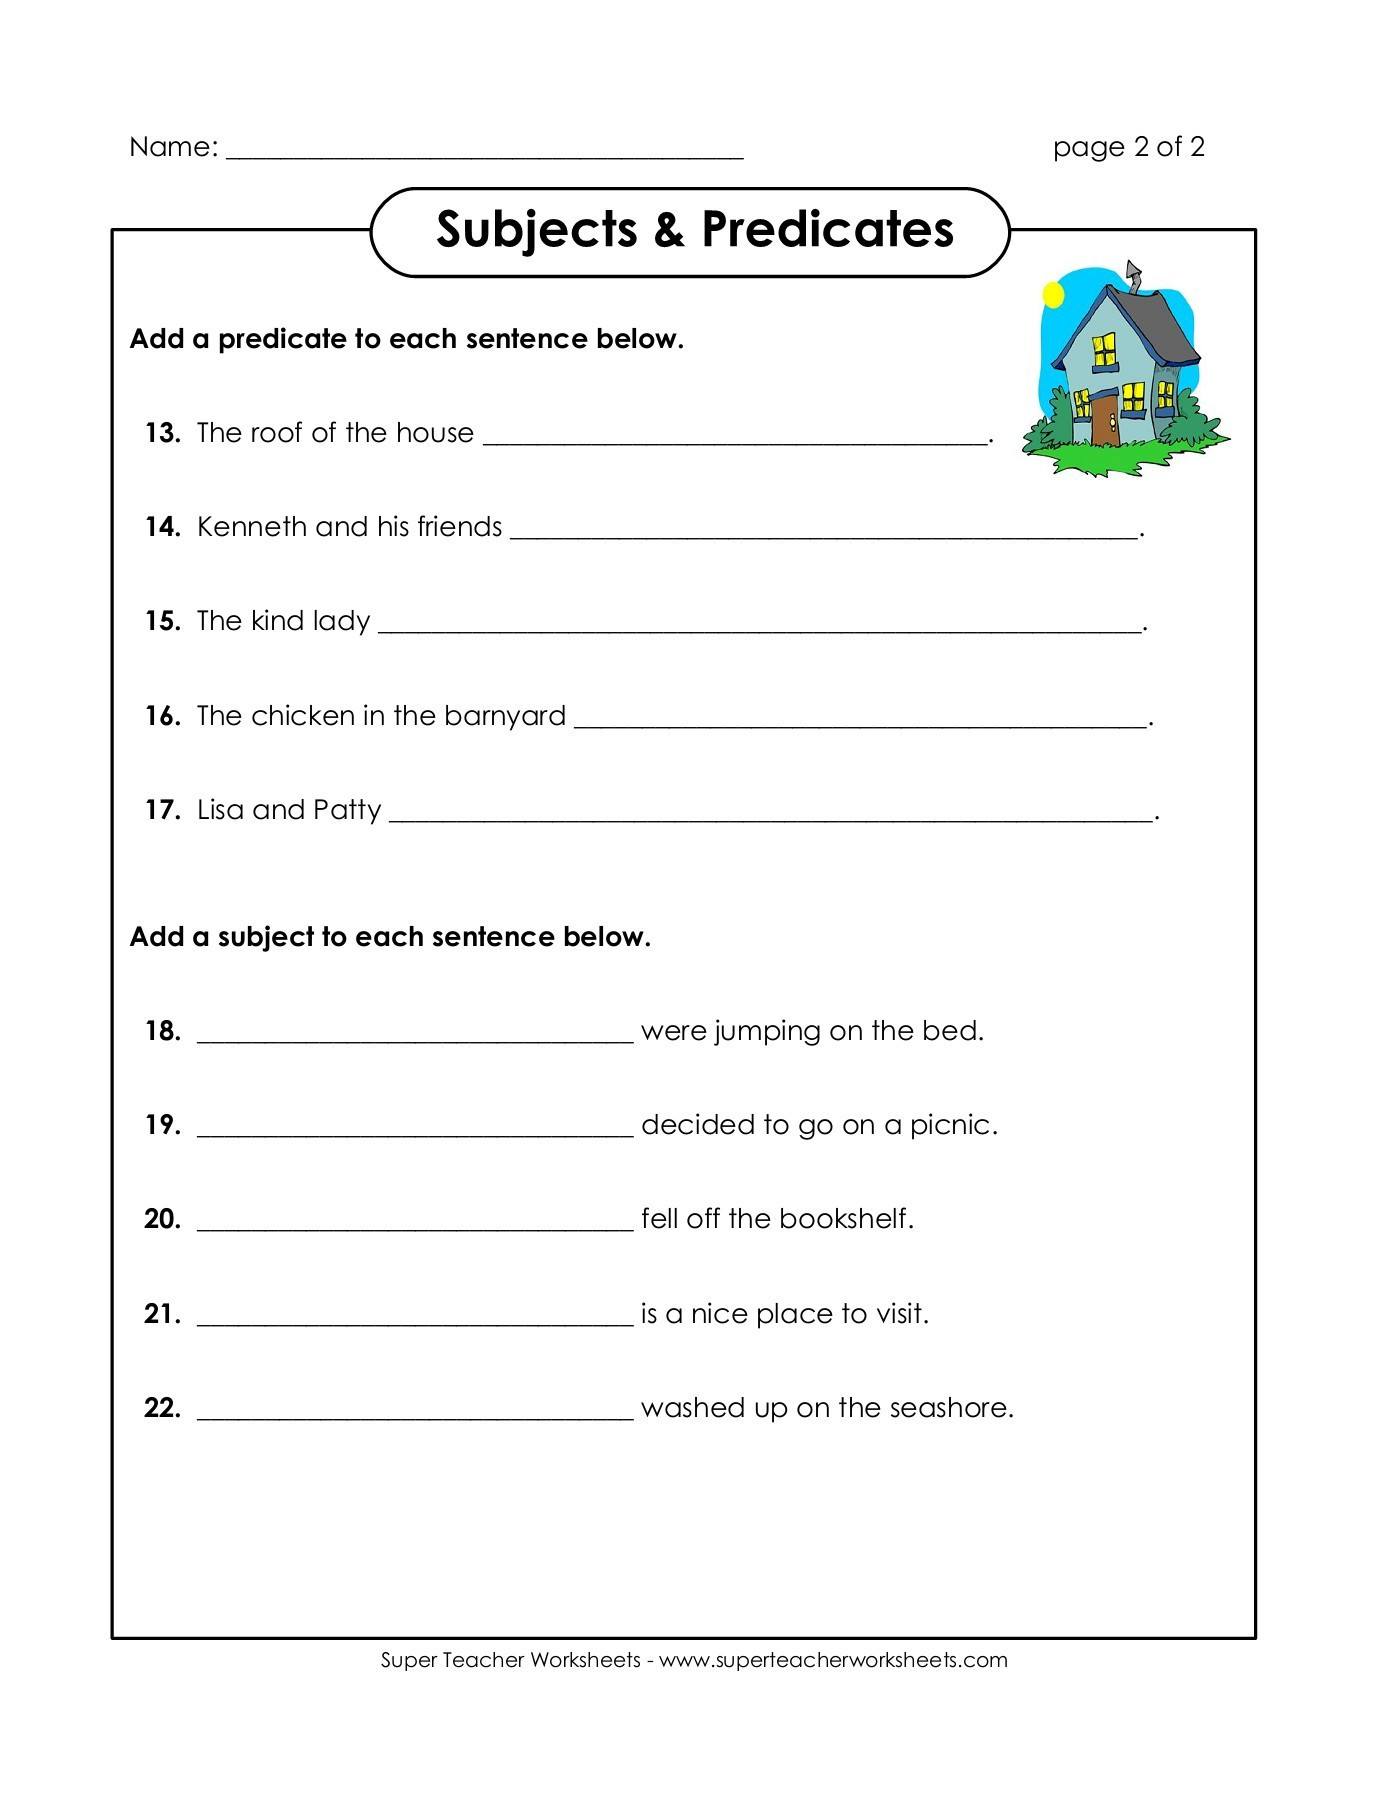 Subjects and Predicates Worksheet Subjects &amp; Predicates Super Teacher Worksheets Pages 1 3